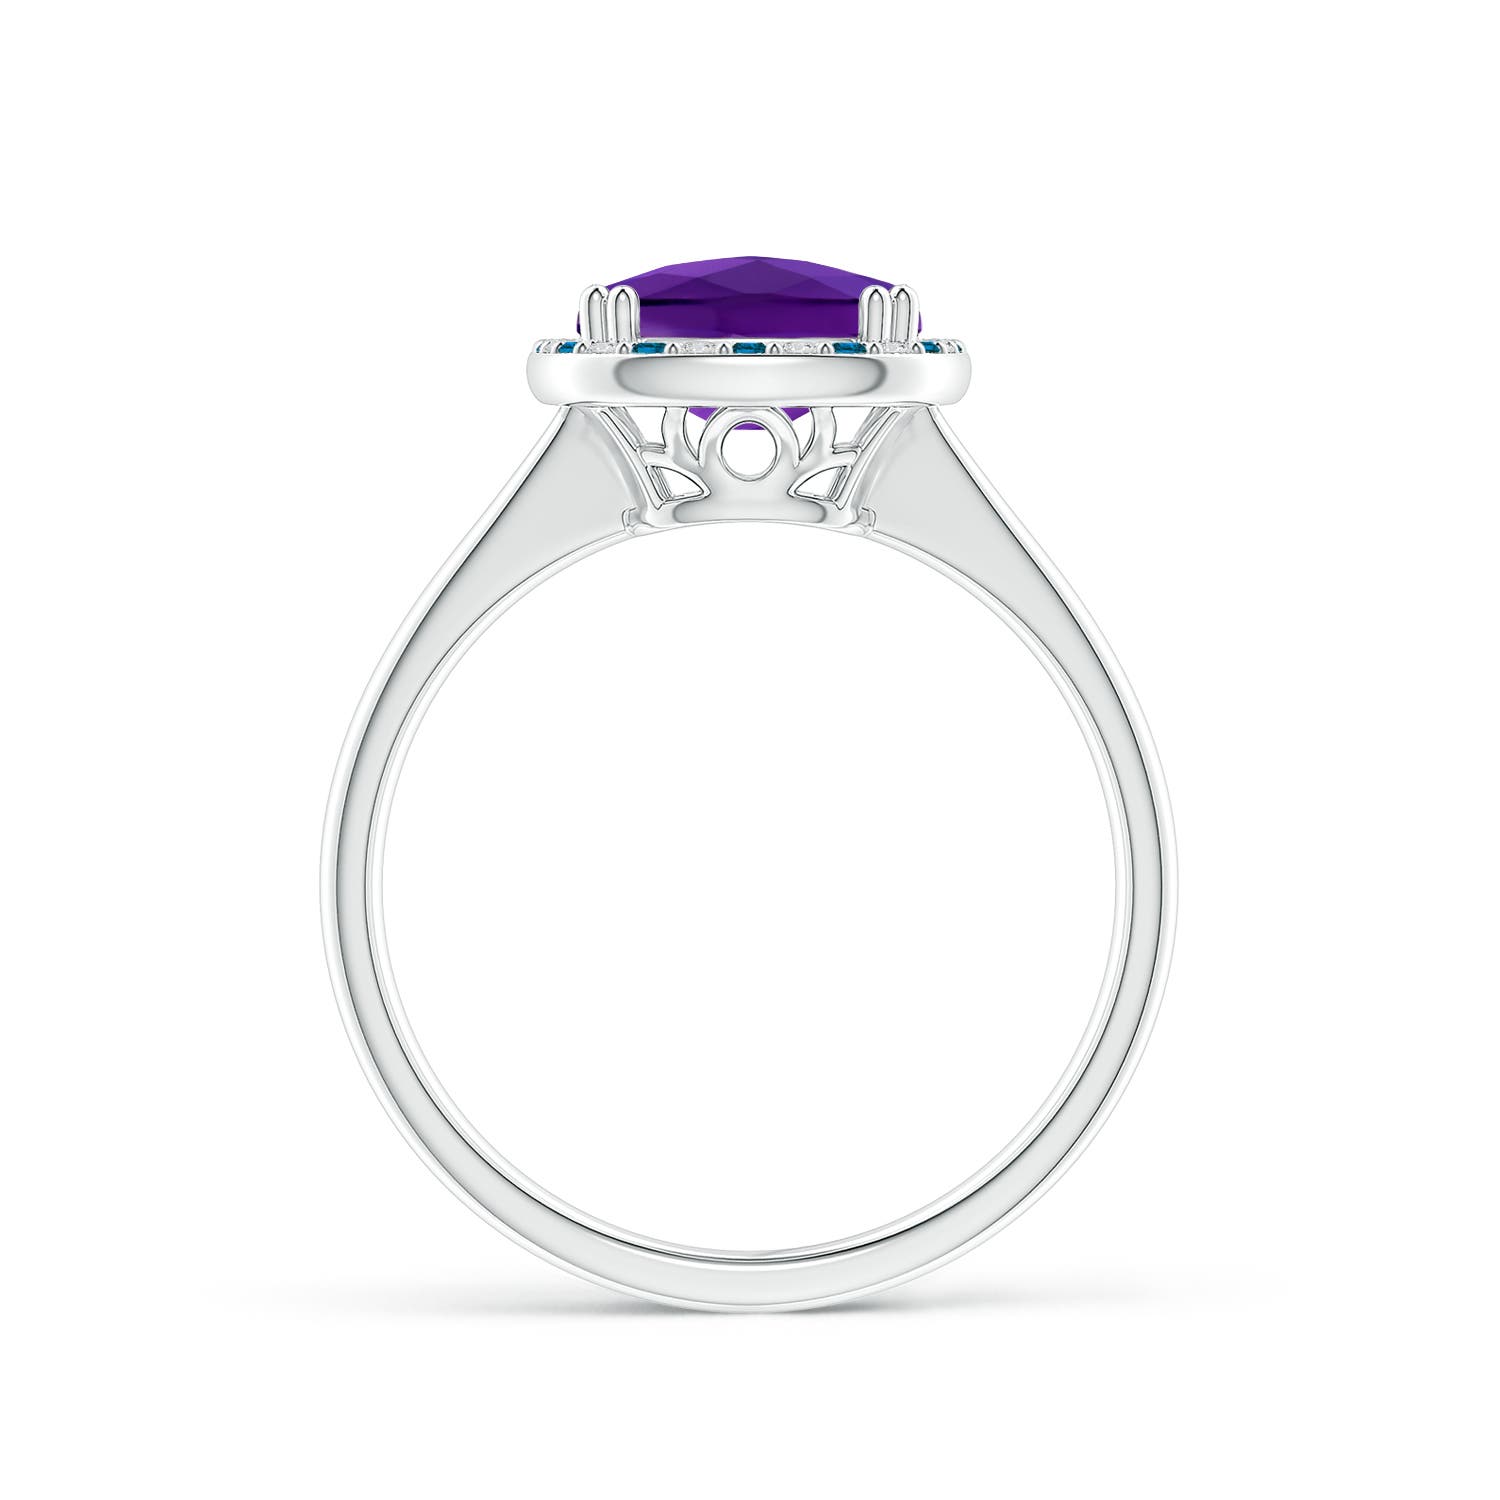 AAA - Amethyst / 3.14 CT / 14 KT White Gold